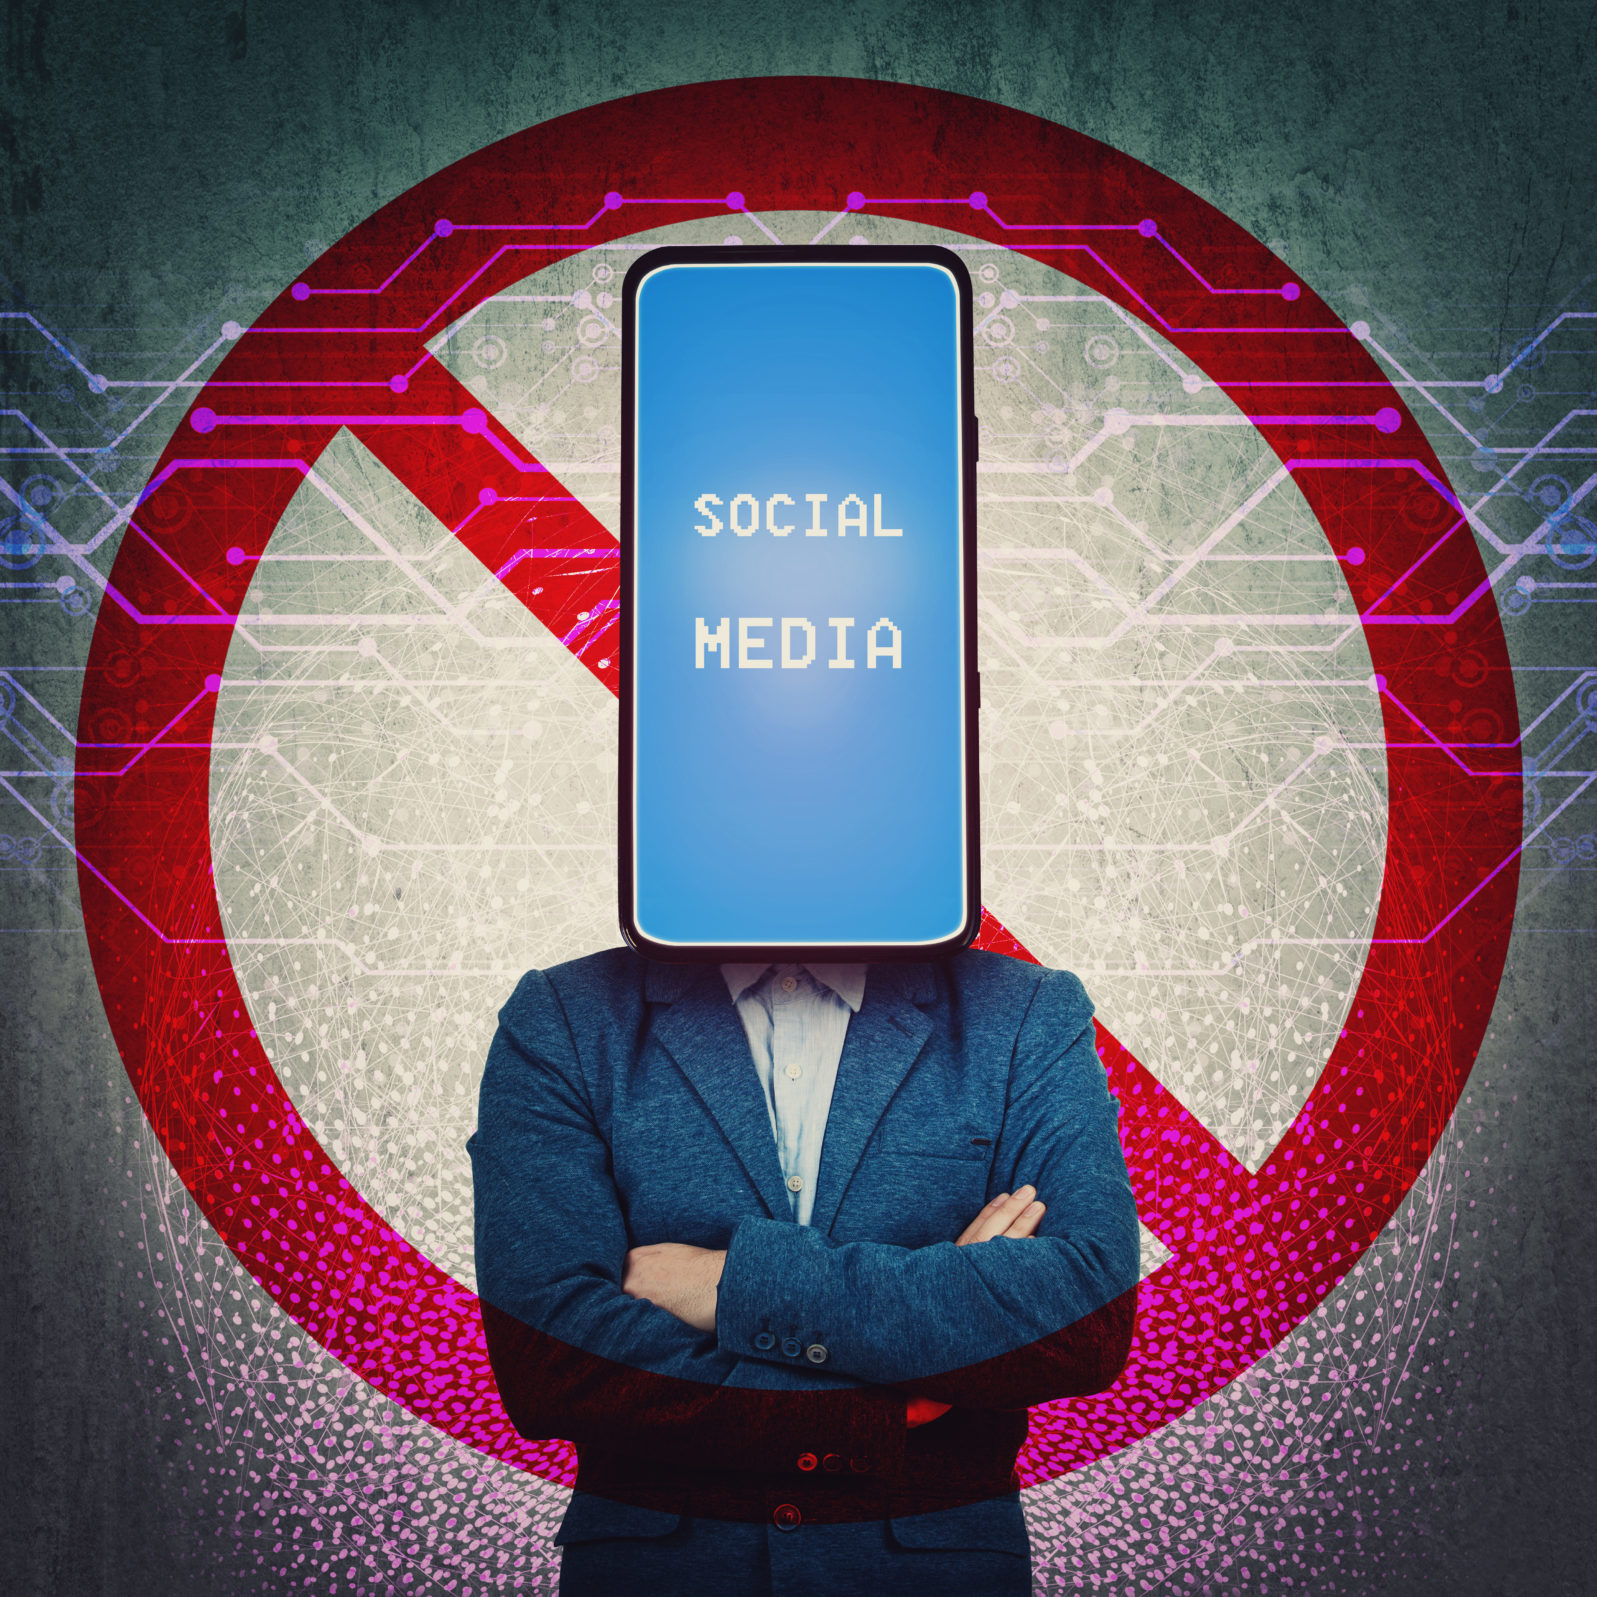 Social media censorship, political war between US president banning social networks. Incognito smartphone headed person with forbidden sign behind his back. Internet communication risk concept.